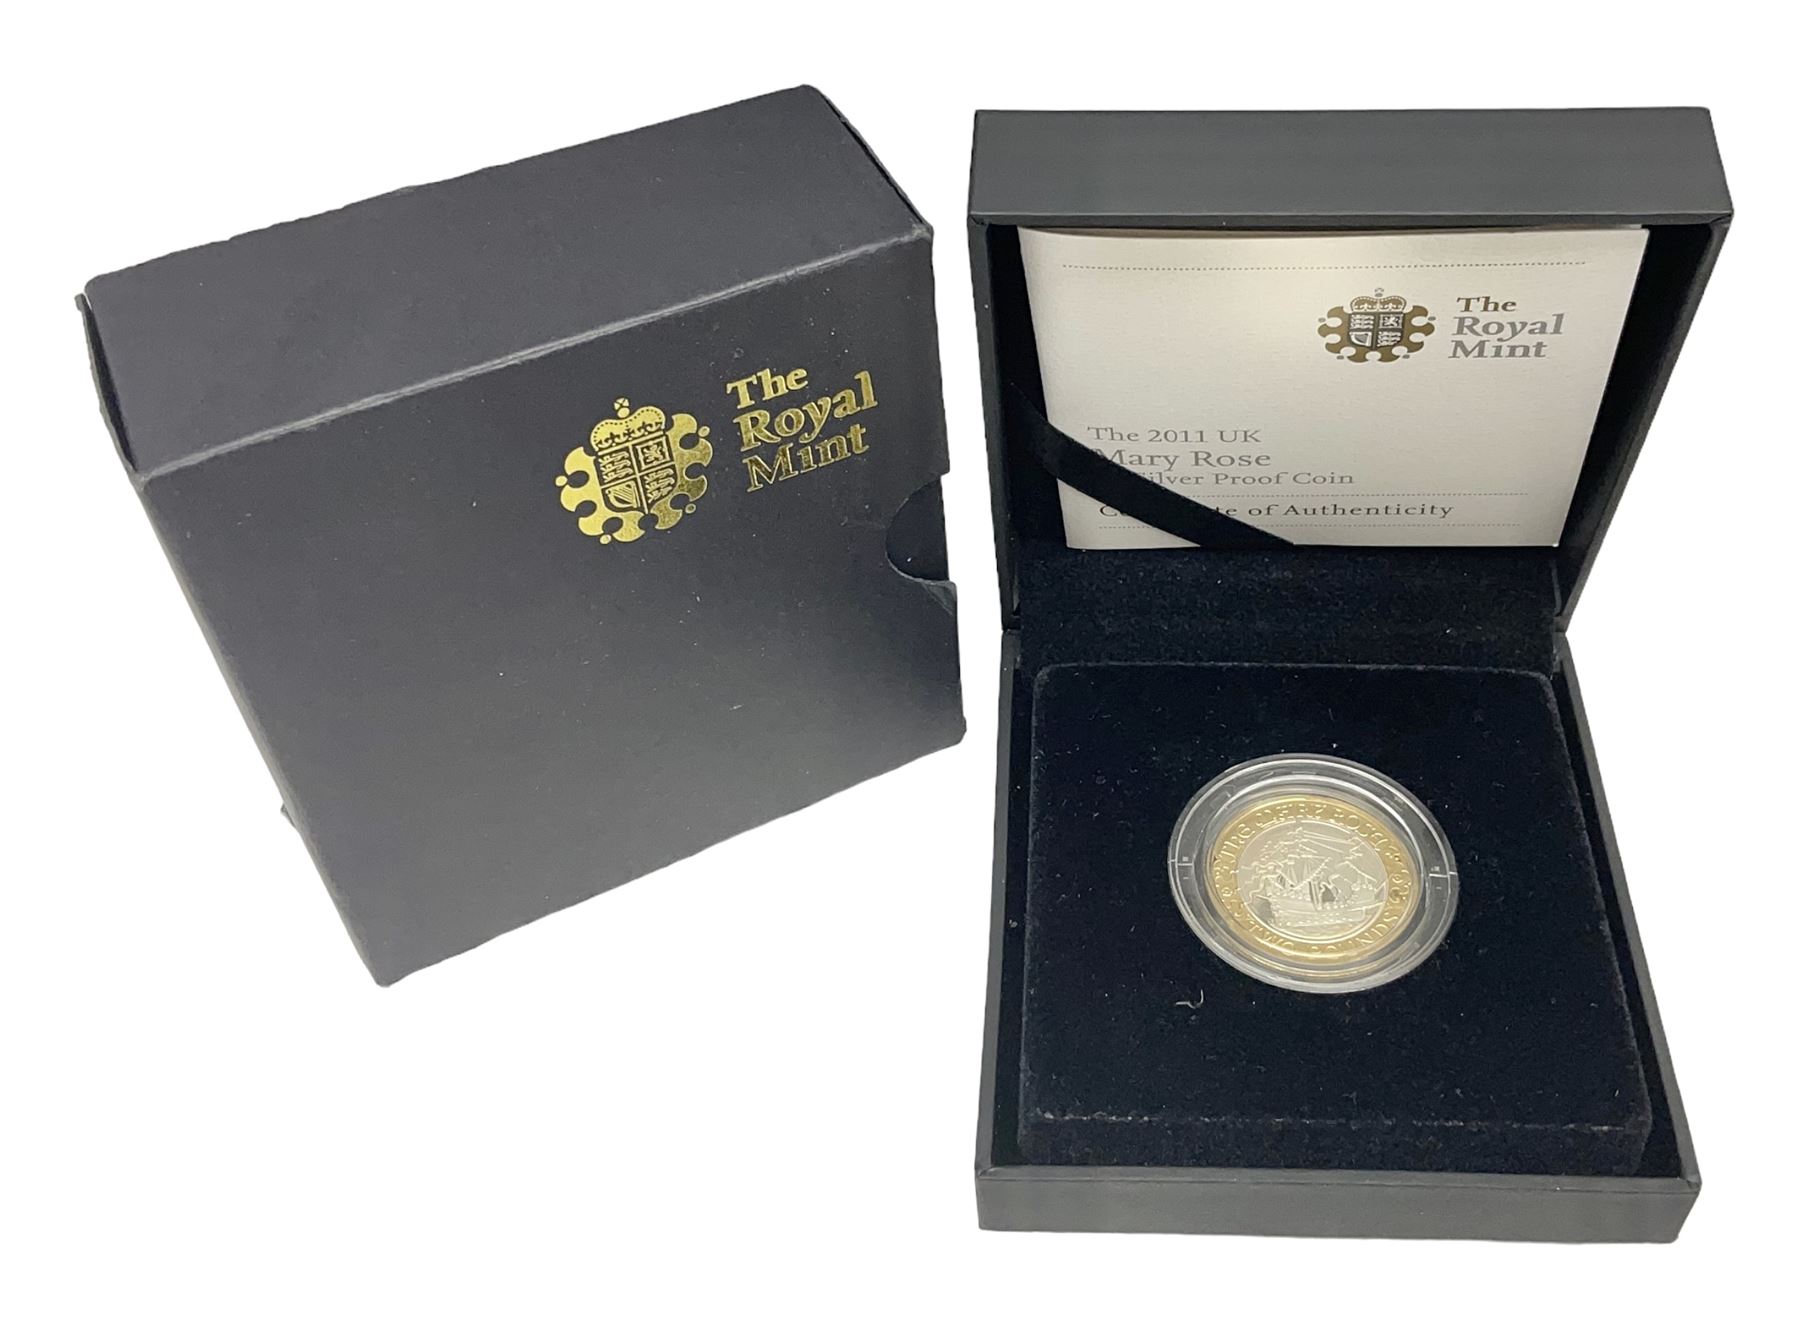 The Royal Mint United Kingdom 2011 'Mary Rose' silver proof two pound coin